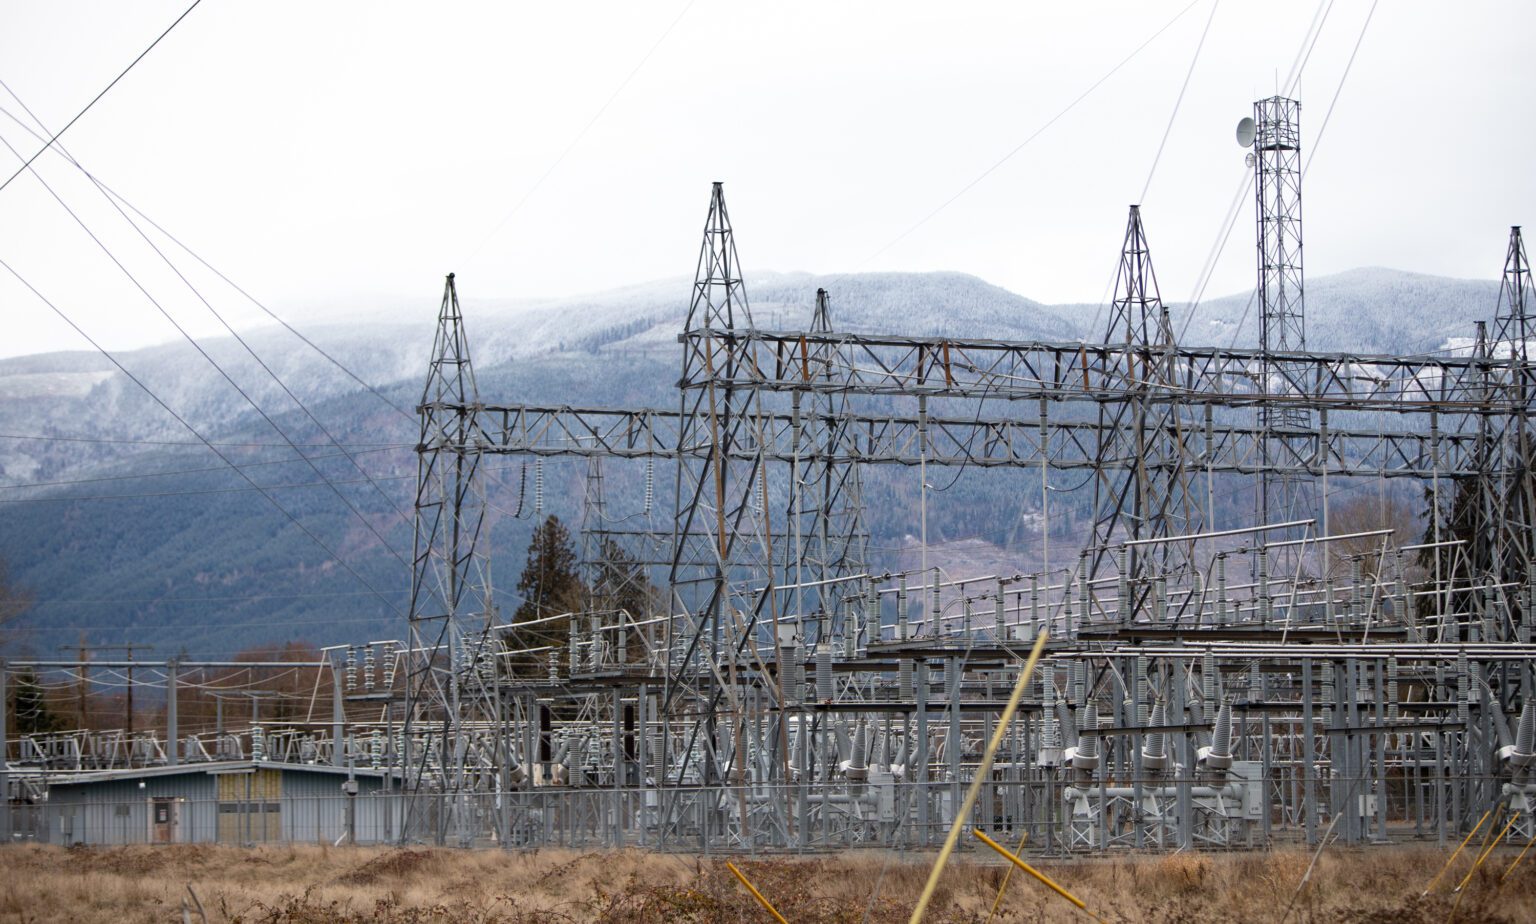 An electrical substation in Sedro-Woolley could be the future home of a battery energy storage facility if Skagit County planners give the project the green light.